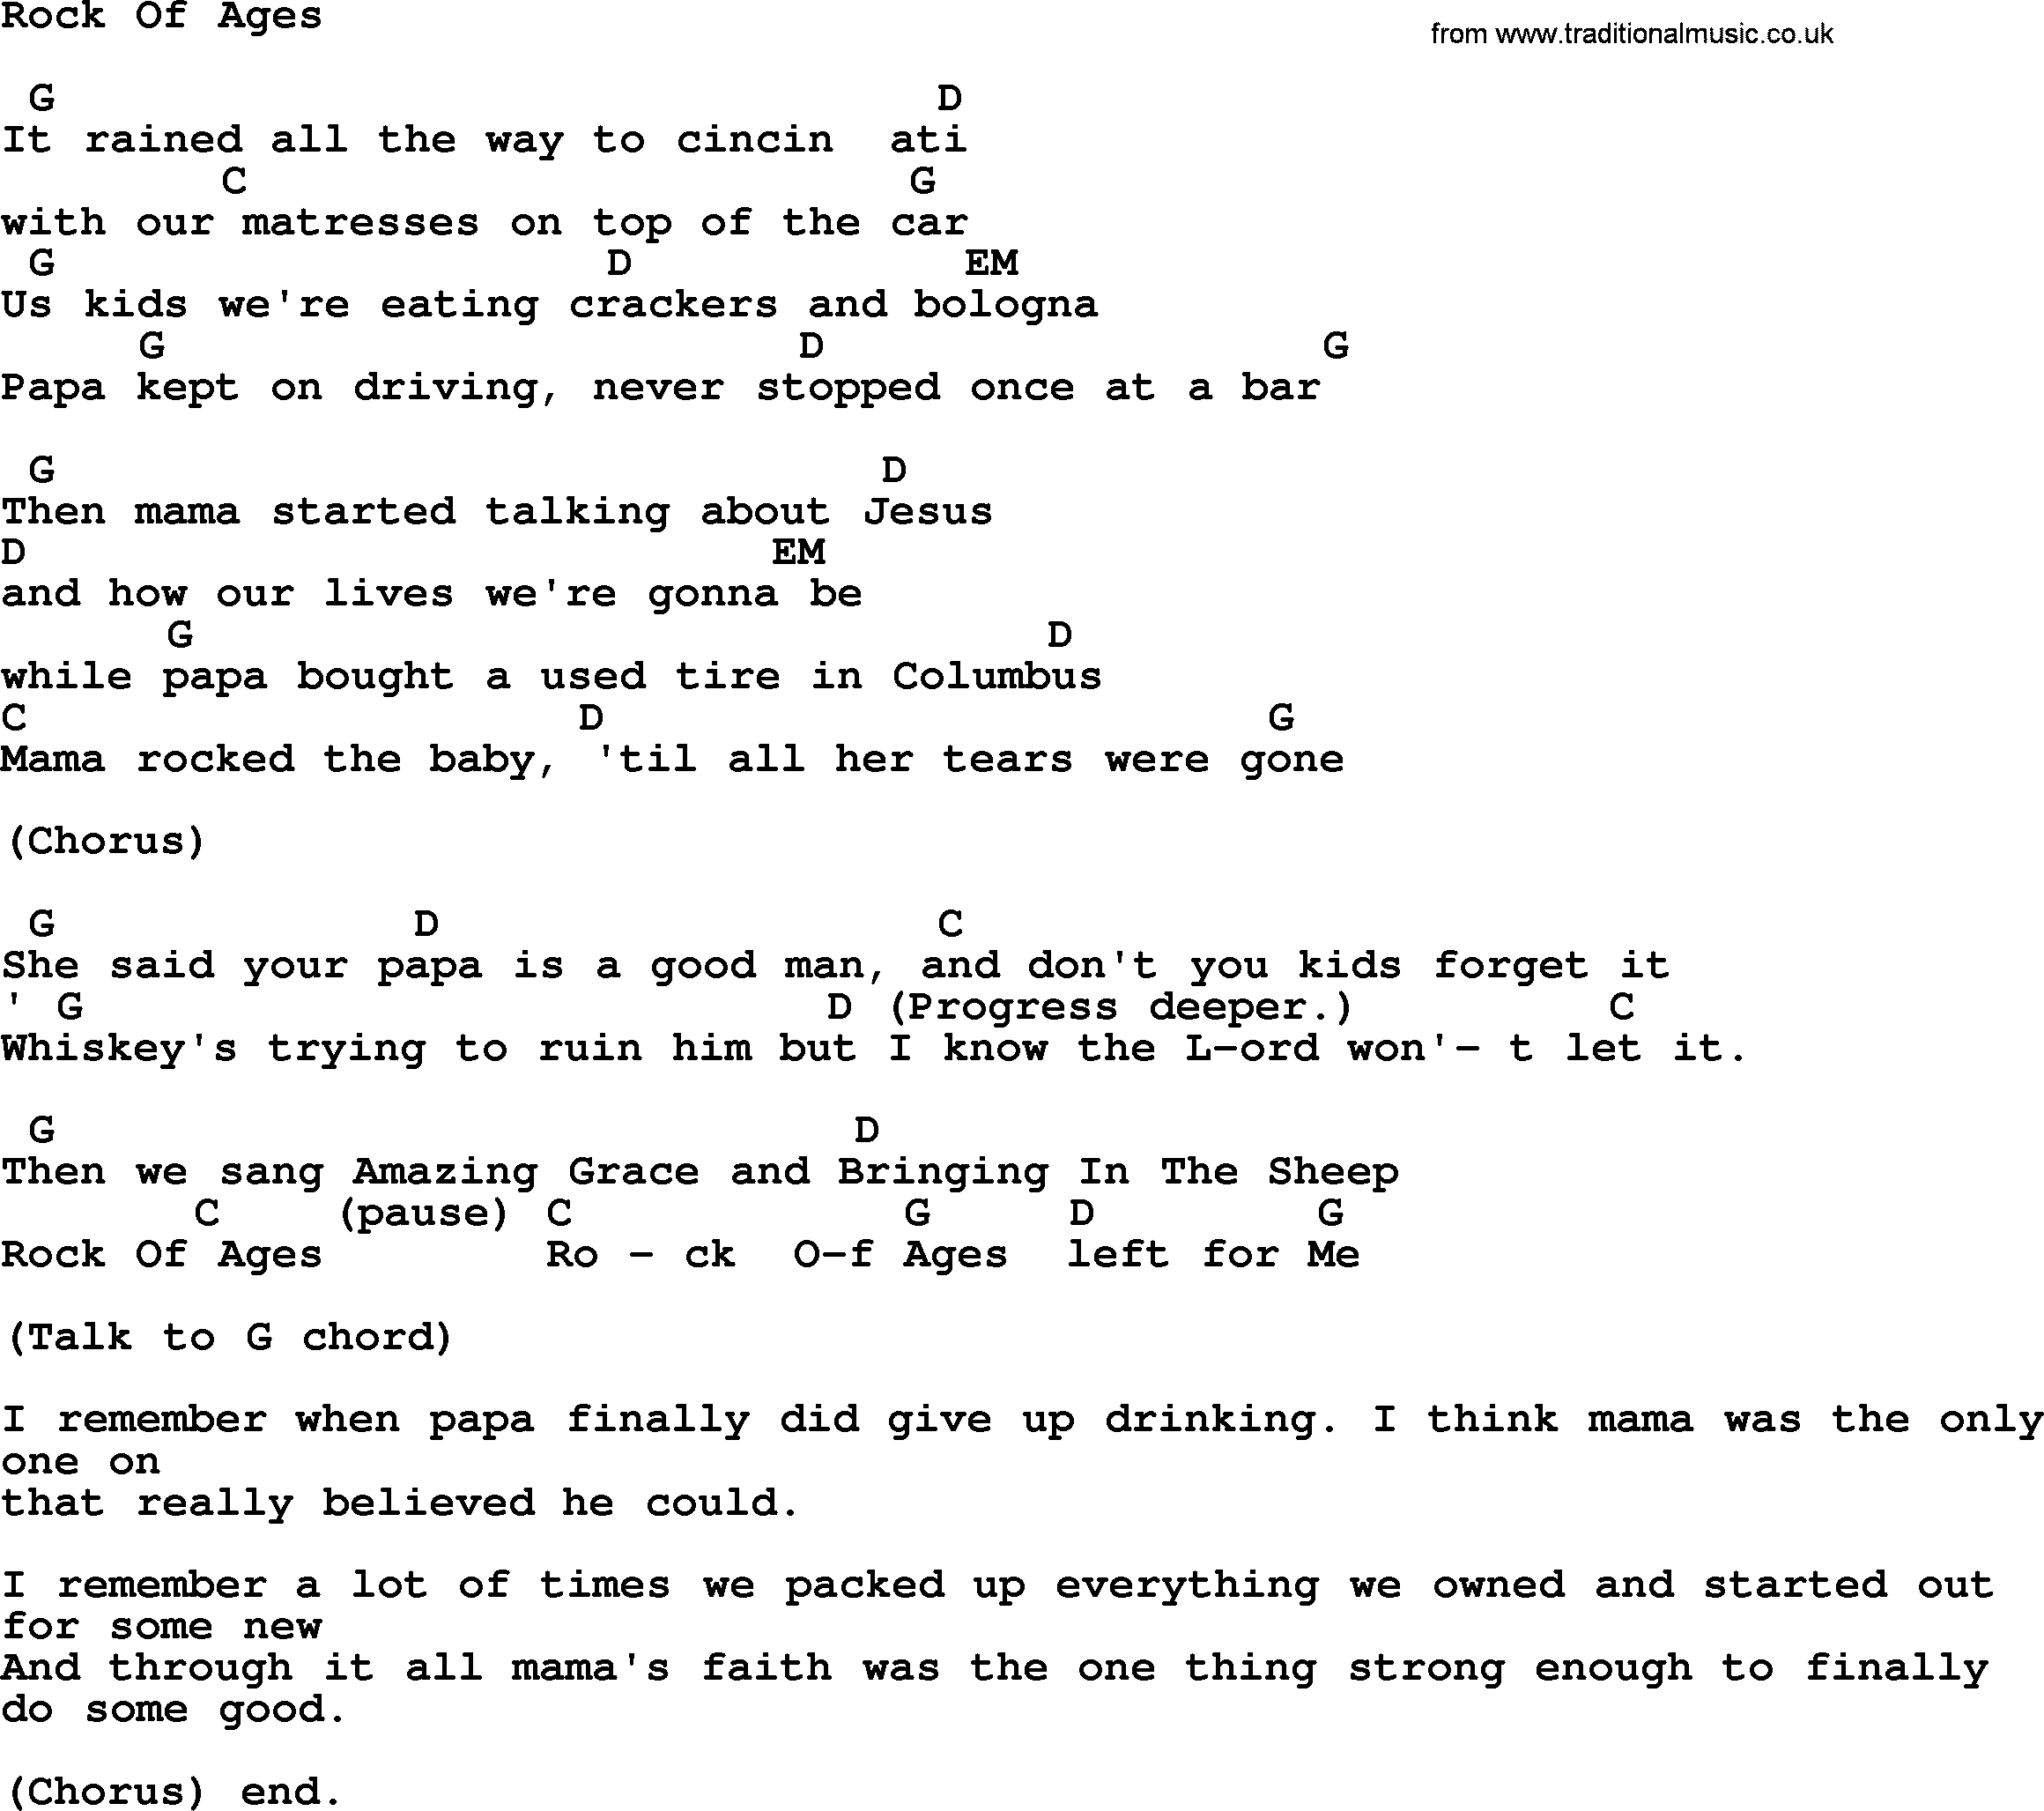 Johnny Cash song Rock Of Ages, lyrics and chords